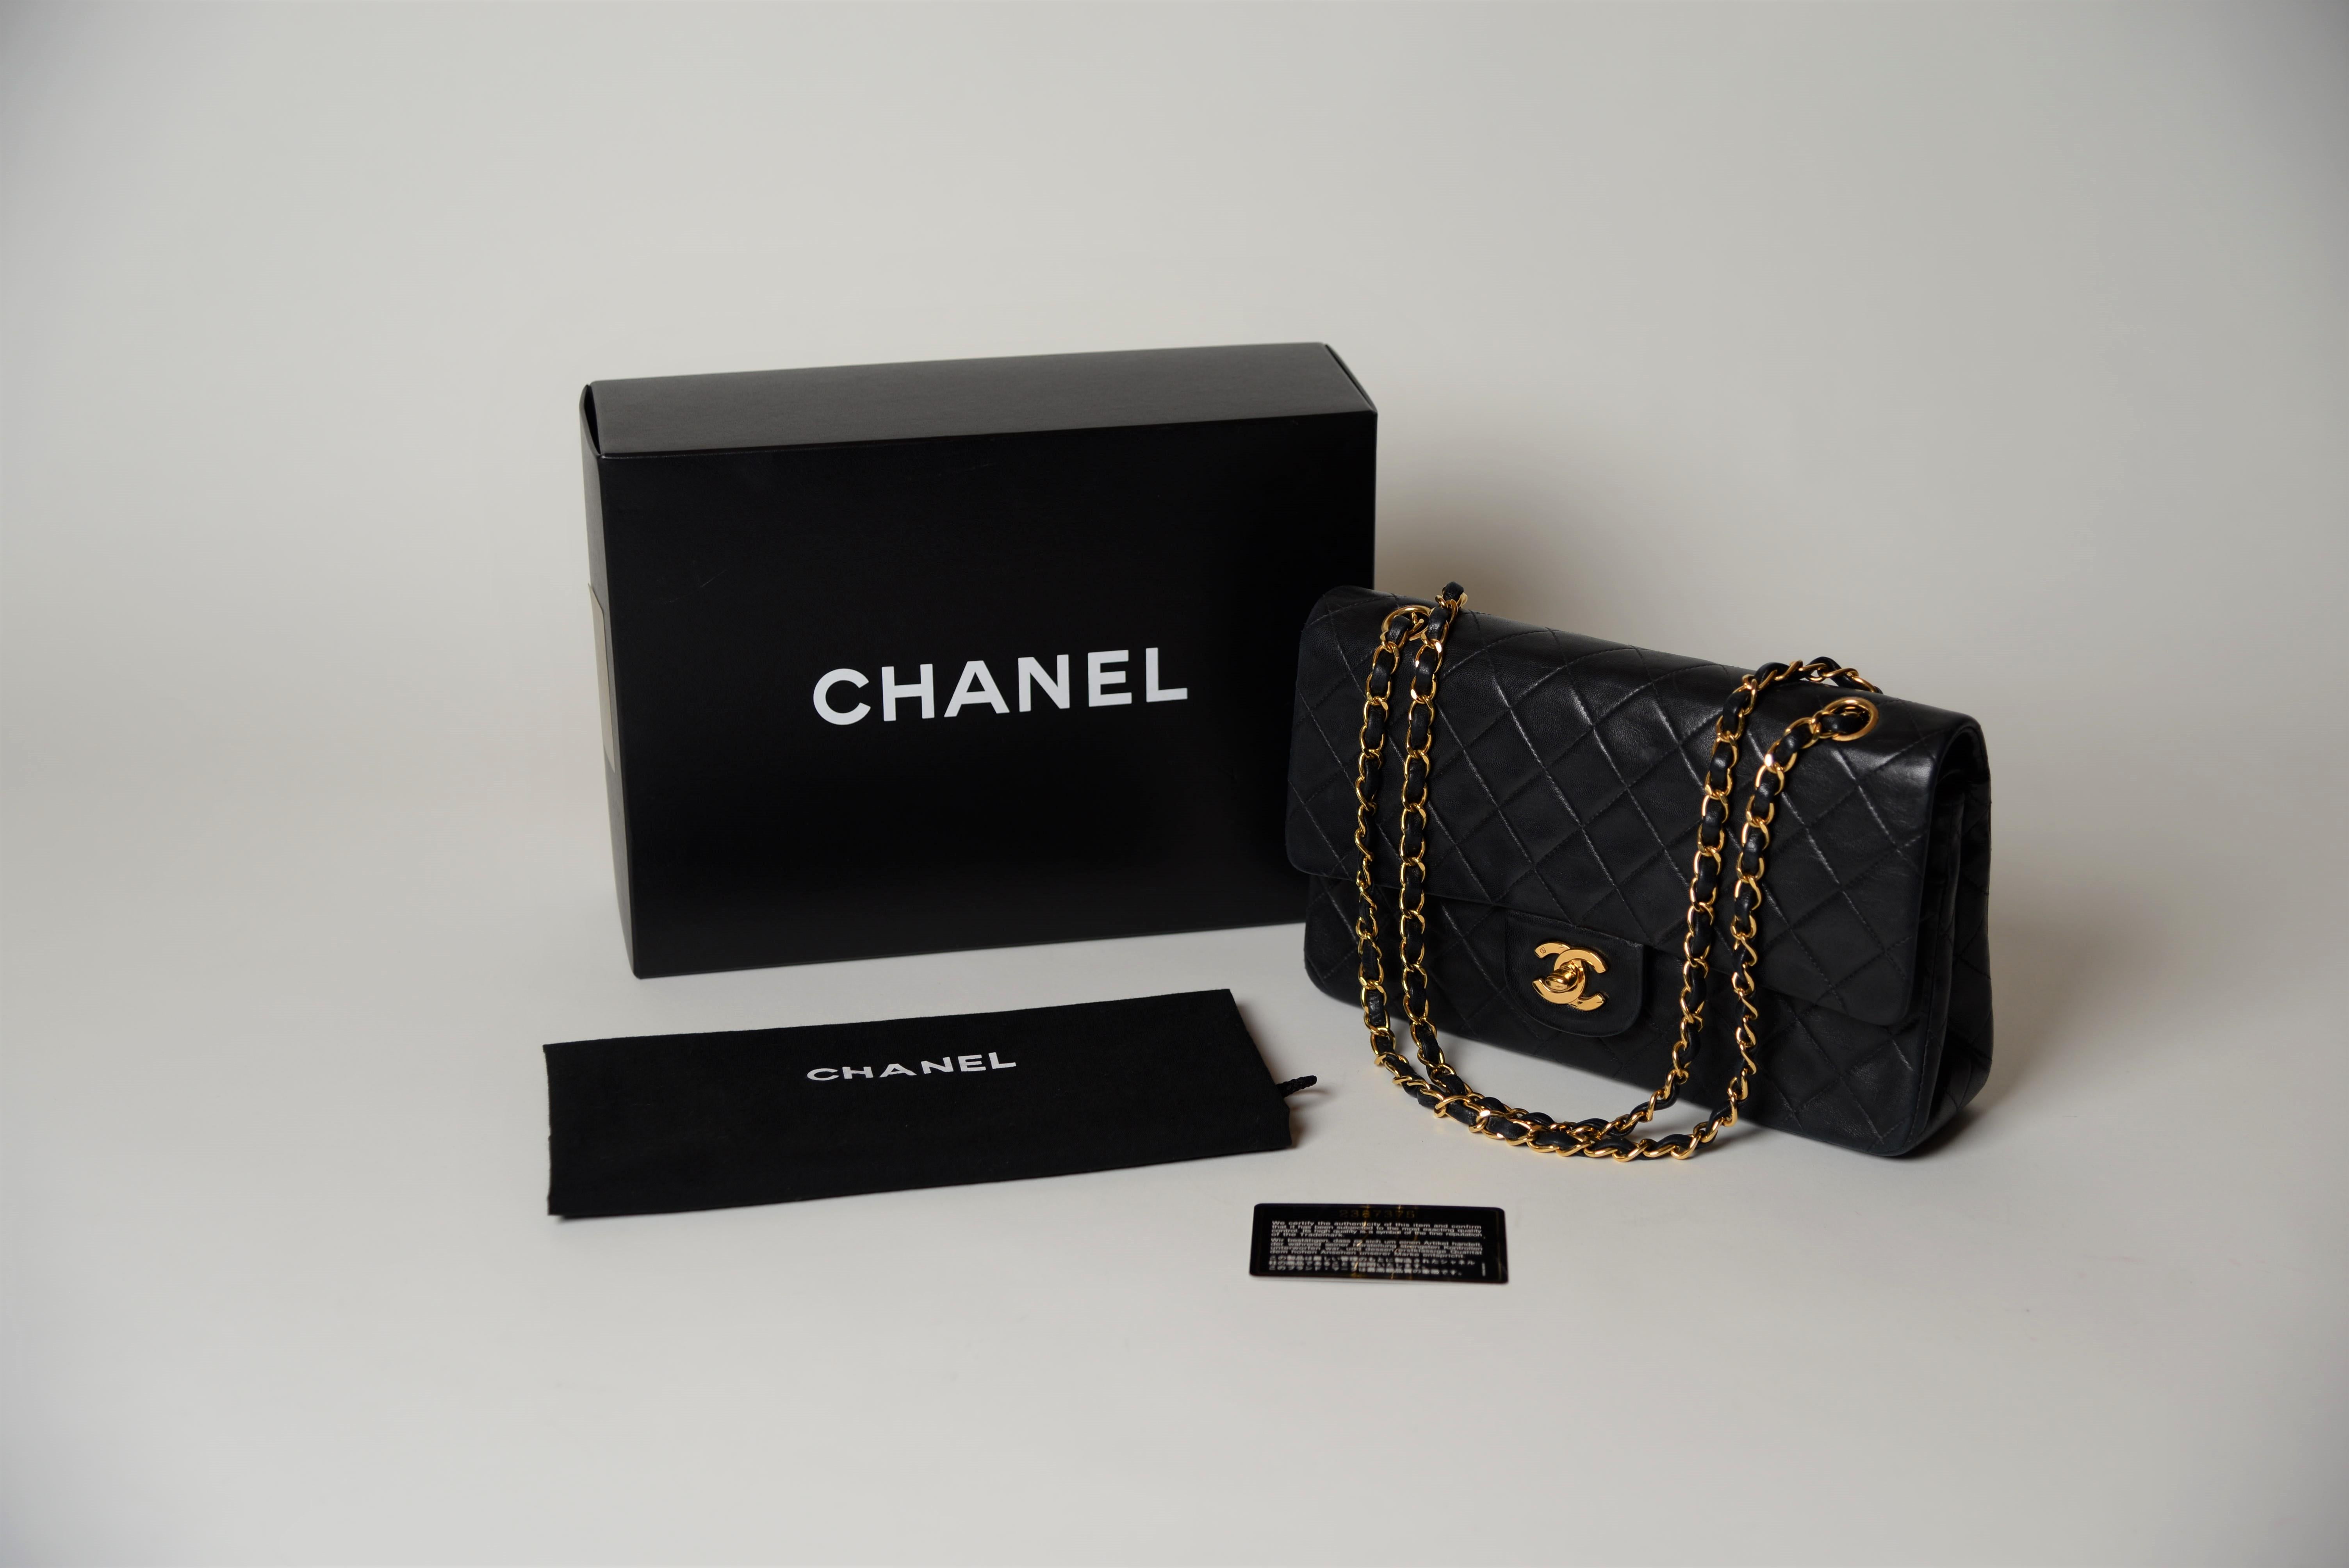 From the collection of Savineti we offer this Chanel Classic Double Flap:
-	Brand: Chanel
-	Model: Classic Double Flap
-	Year: 1991-1994
-	Code: 2387375
-	Condition: Good
-	Materials: lambskin leather
-	Extras: Full-Set - original Chanel box,